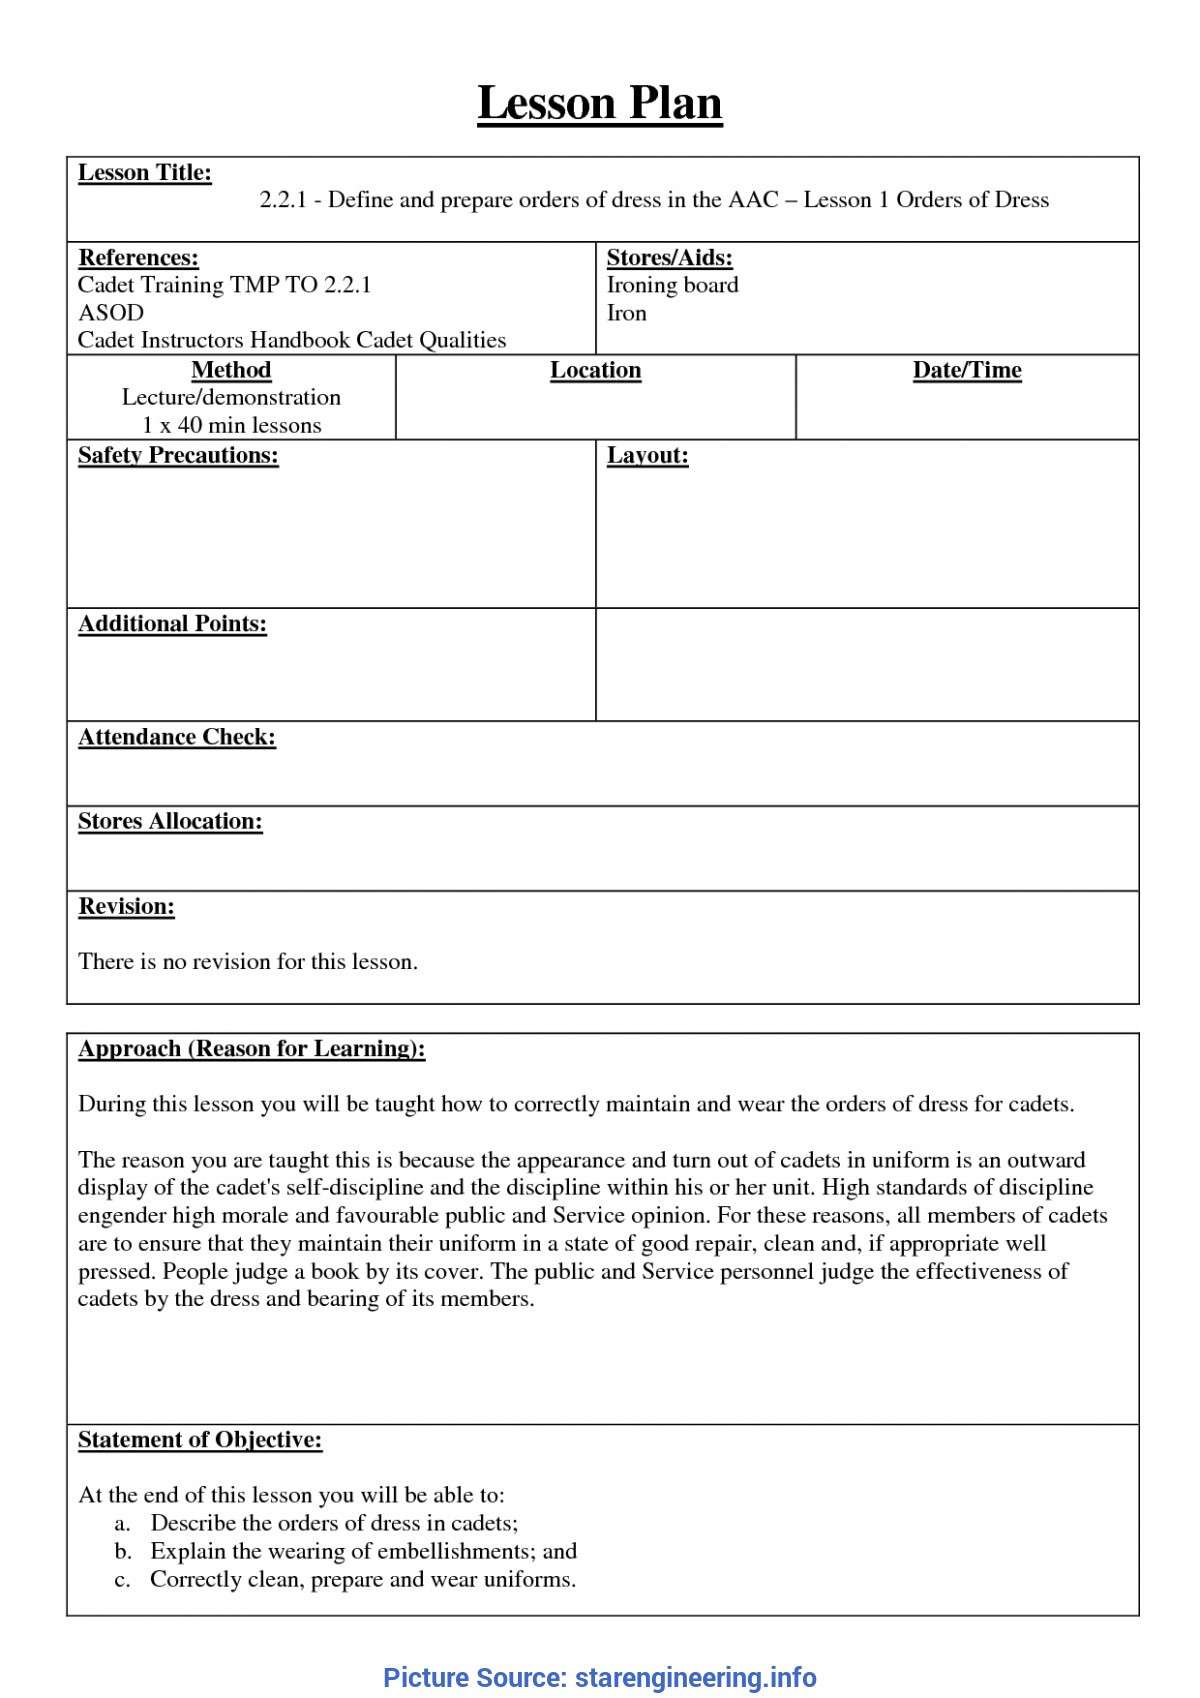 Lesson Plan Template Word Lesson Plan Template Nsw Ten Fantastic Vacation Ideas for